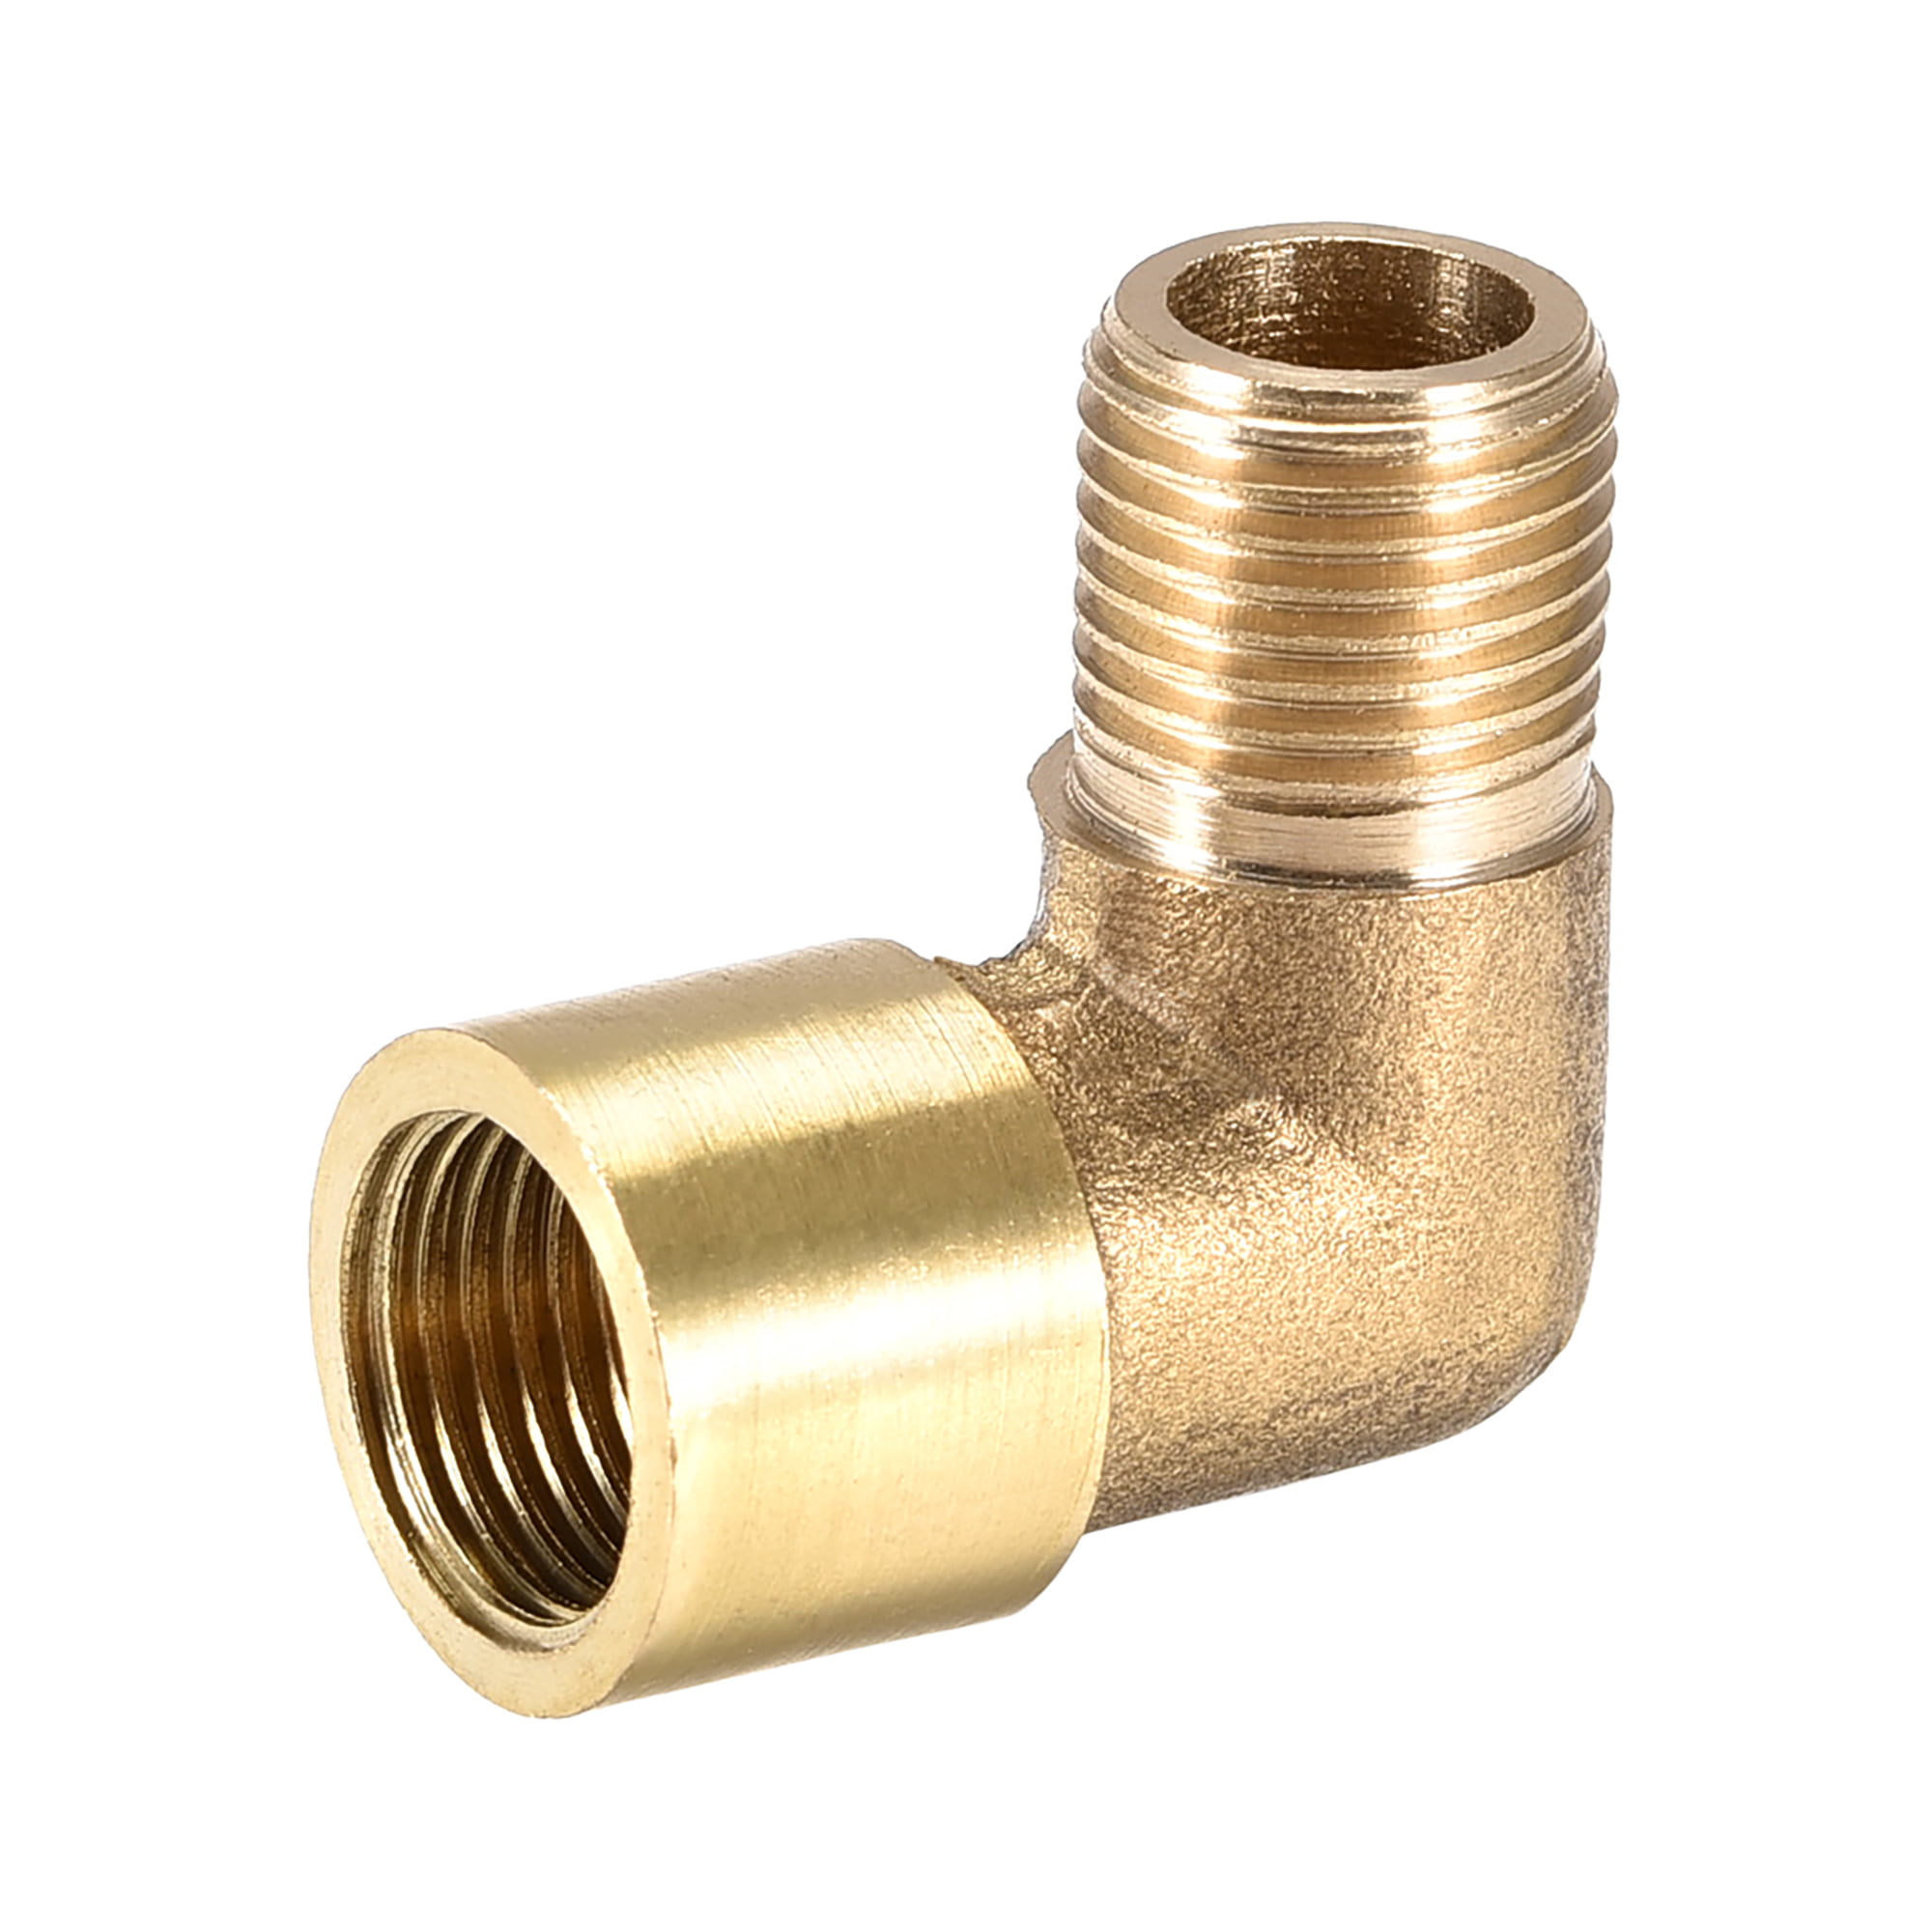 Brass Material Light Series 12L x 1/4 NPT Male Thread 90 Degree Male Elbow for 12MM OD Tube